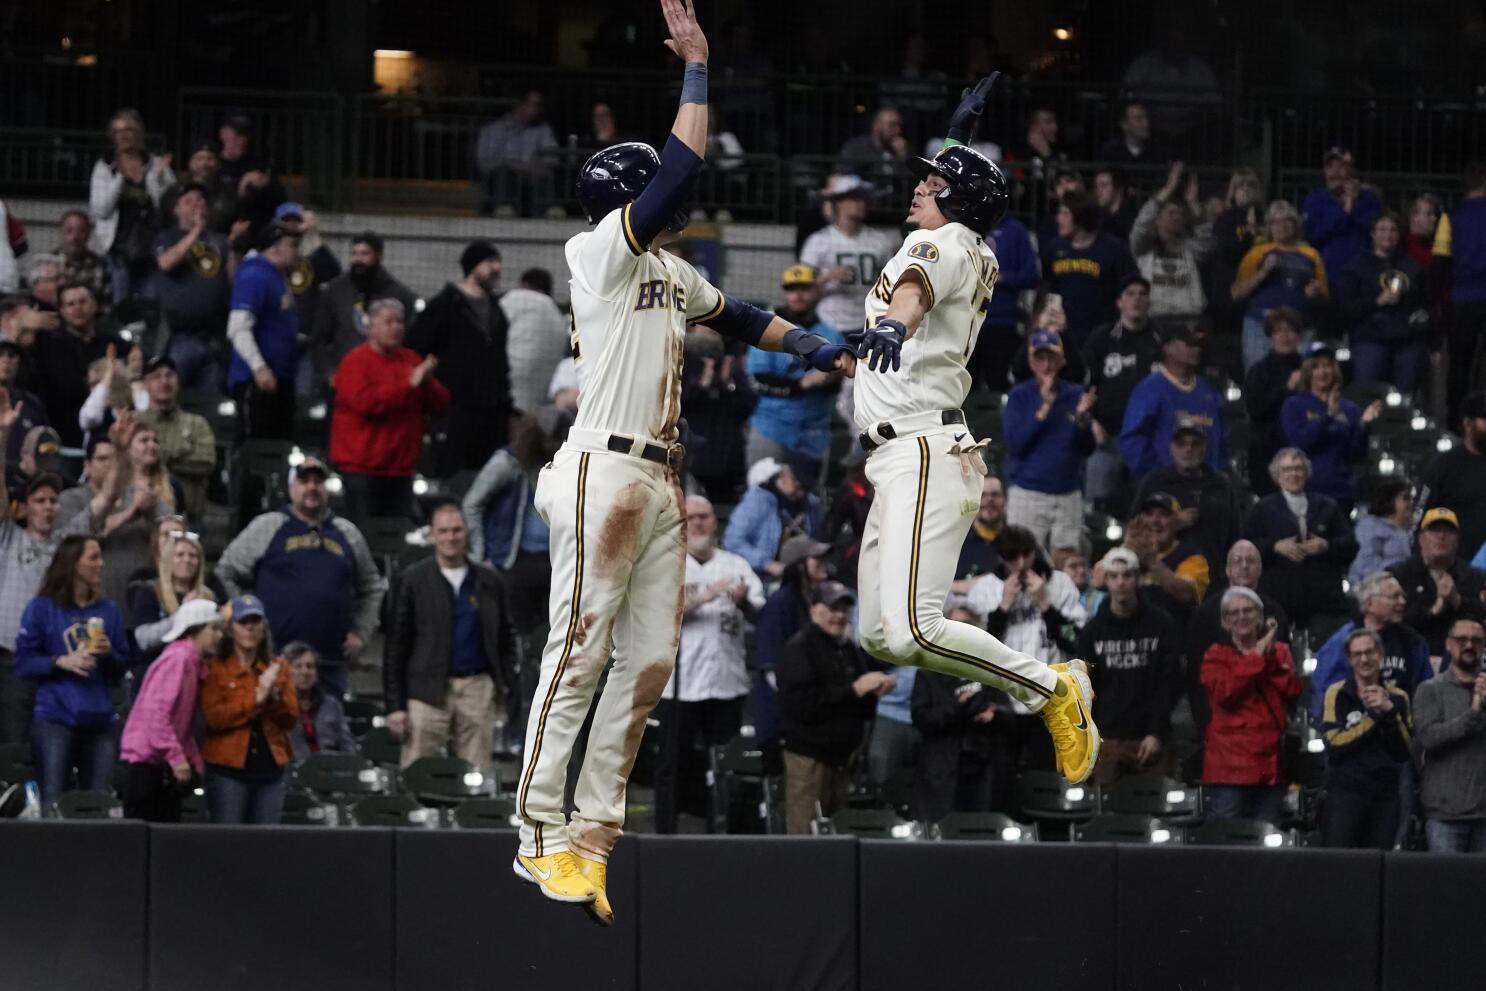 Willy Adames homers twice, drives in 5 as the Brewers down the